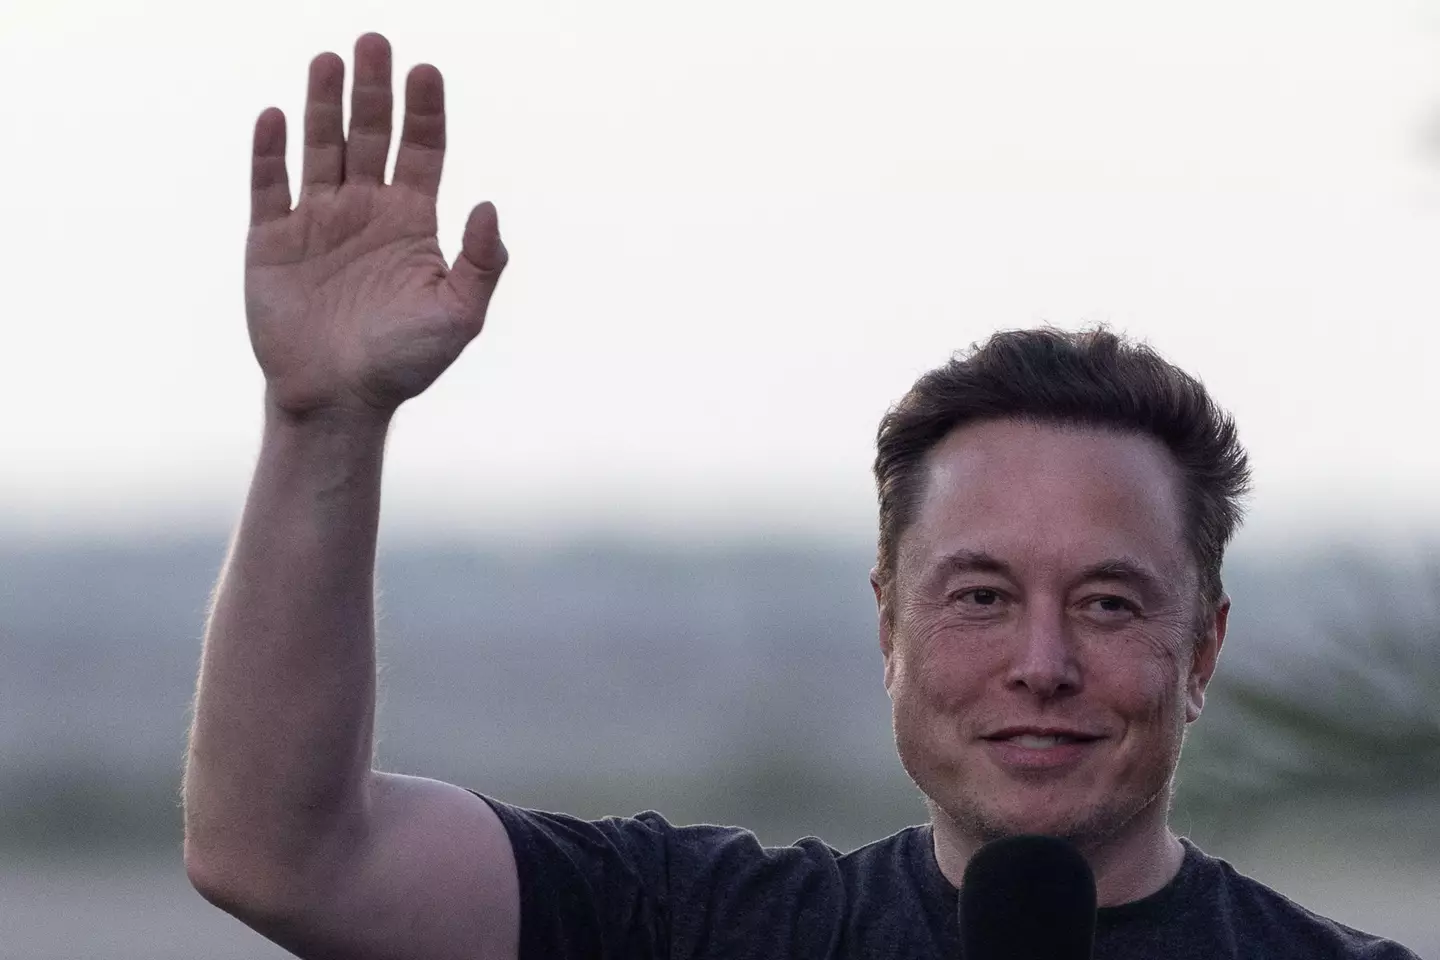 Elon Musk responded to fans on Twitter who asked about the method.